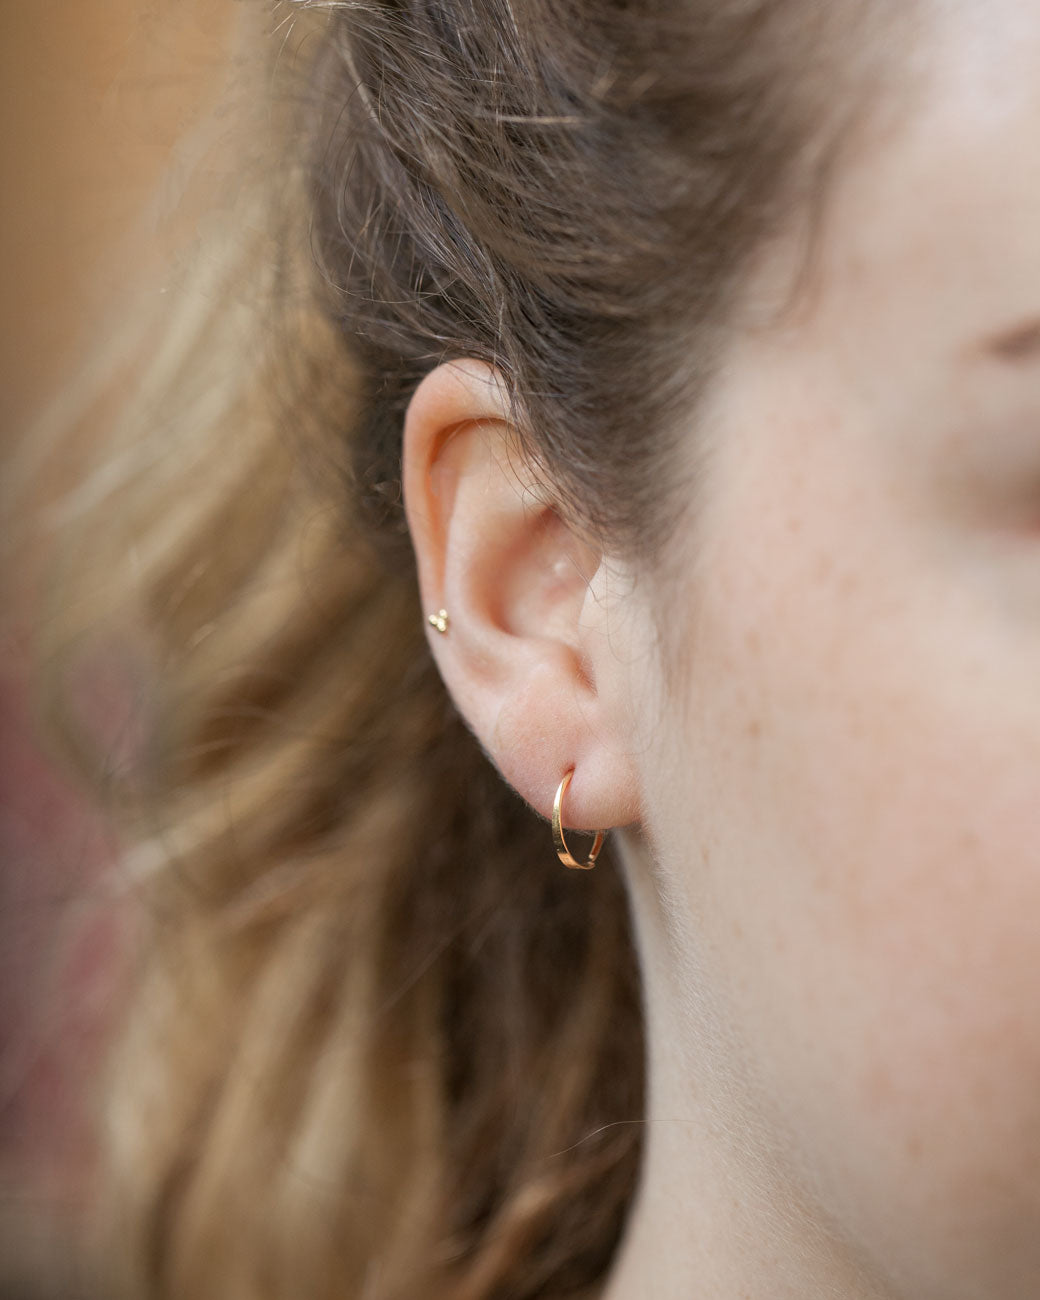 This little hoop is simple and easy to wear. It's a little larger than a snug; meaning it will not touch the ear lobe, but rather hang slightly below.